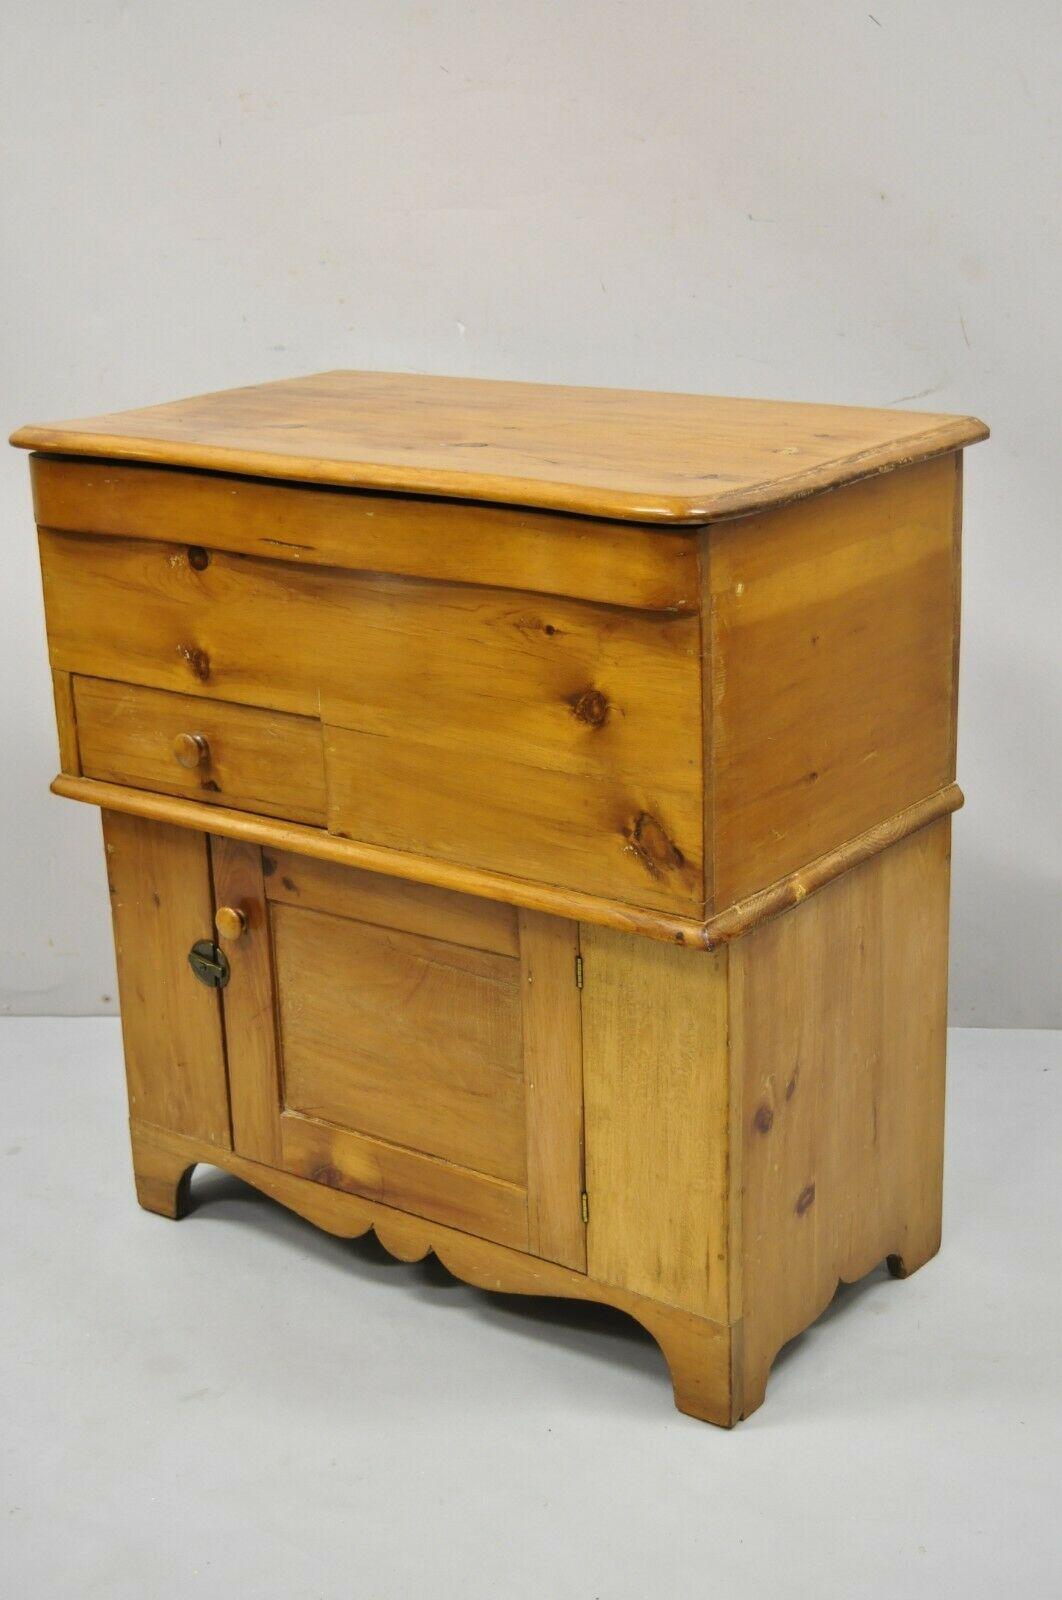 Antique 19th C. Primitive Pine Wood Lift Top Dry Sink Washstand Commode Cabinet For Sale 1